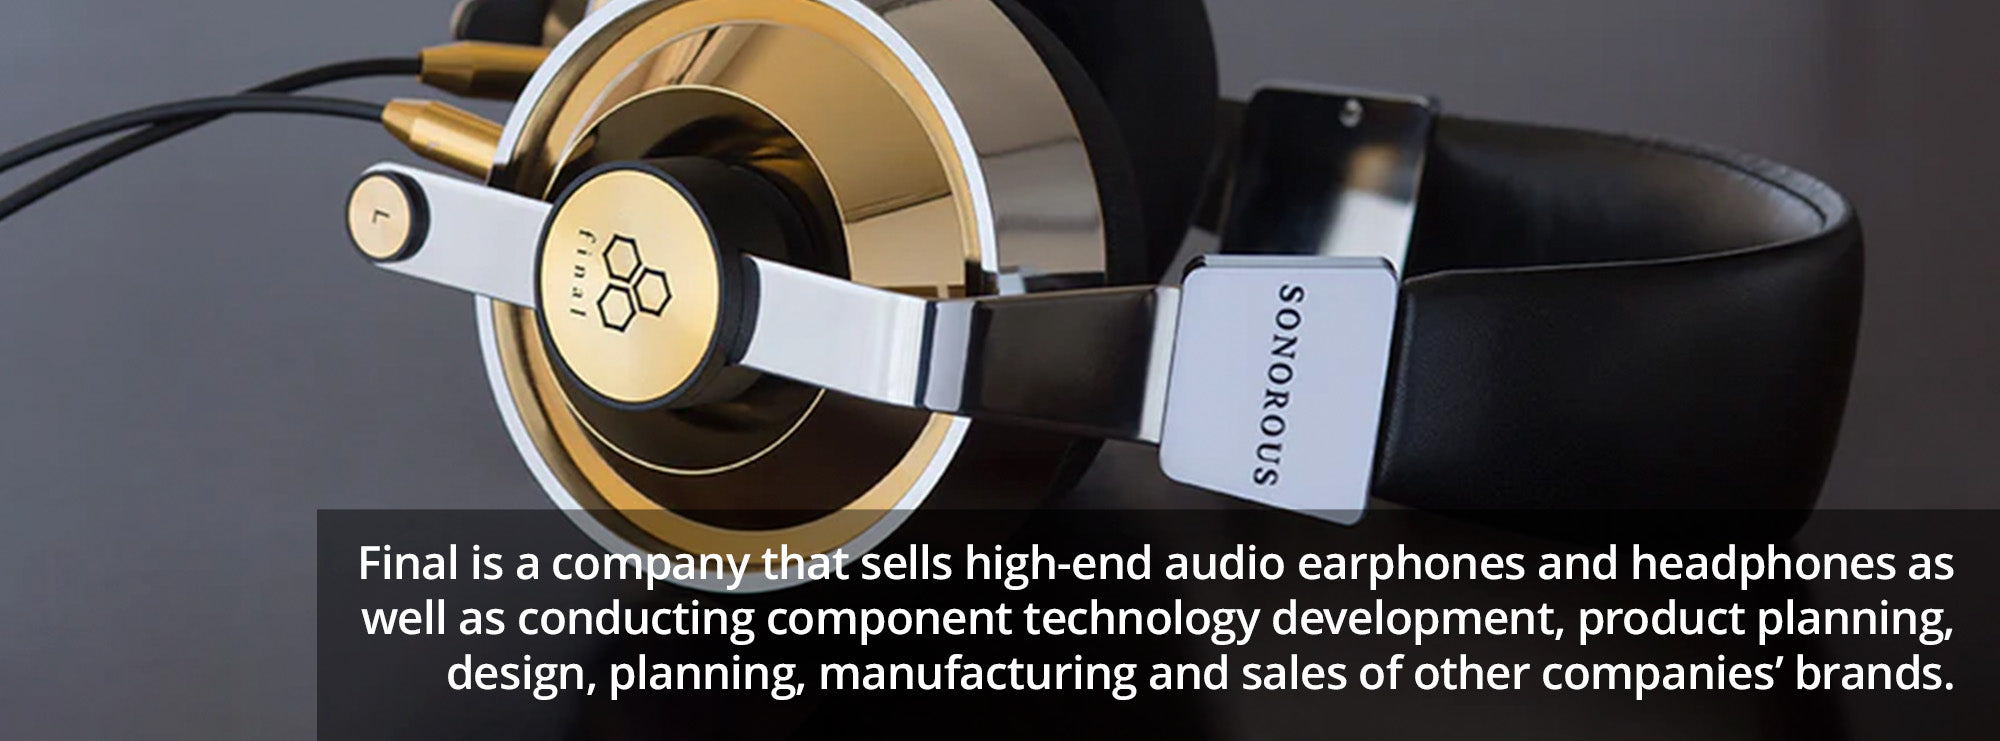 Final is a company that sells high-end audio earphones and headphones as well as conducting component technology development, product planning, design, planning, manufacturing and sales of other companies’ brands.